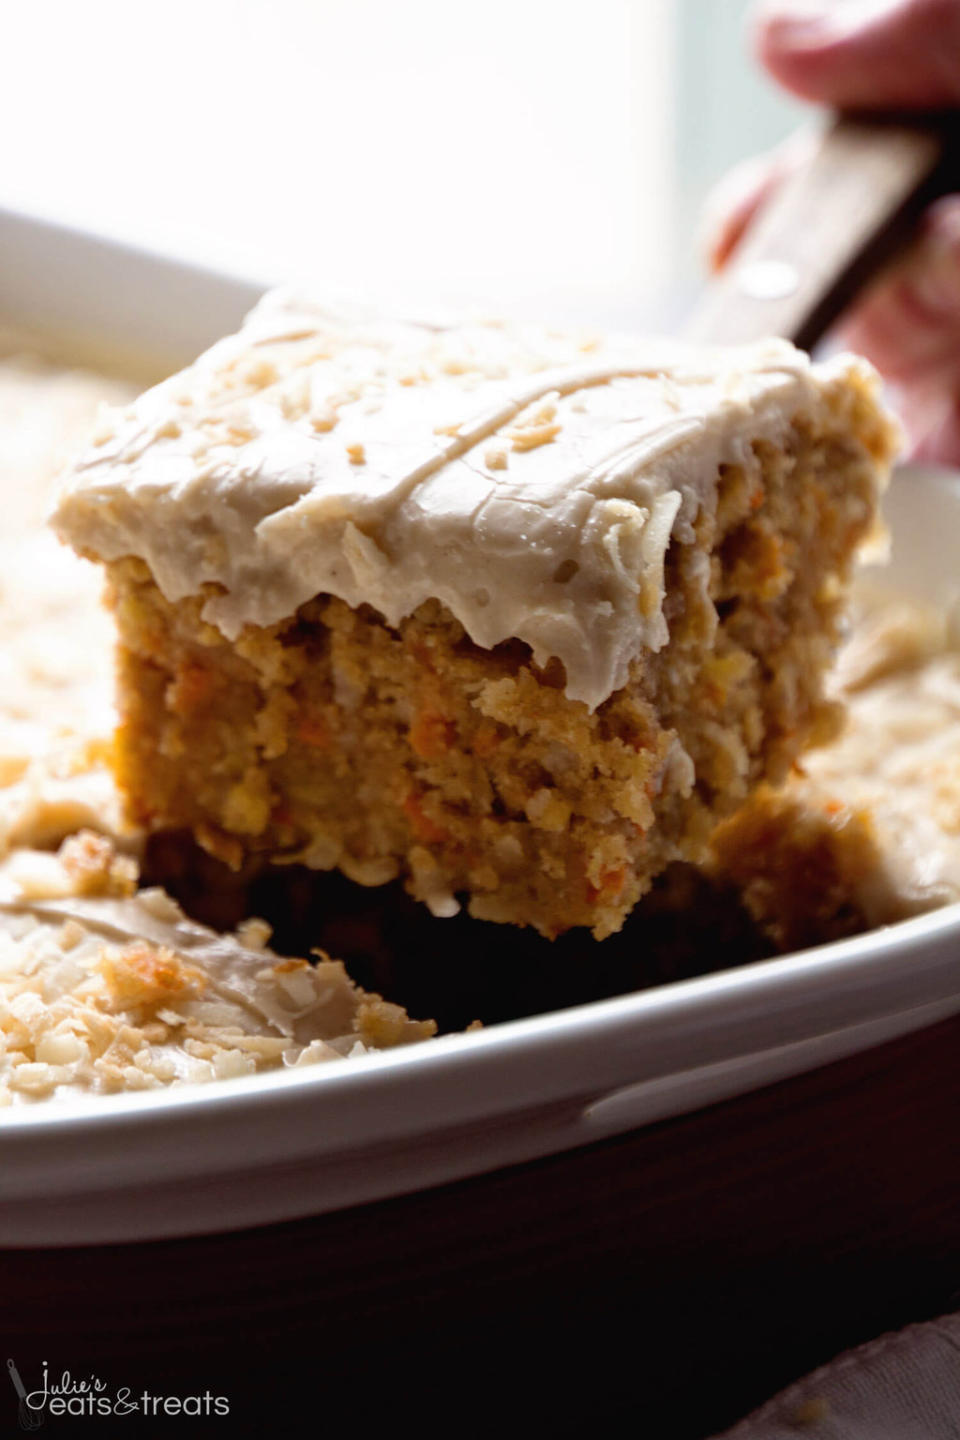 Made from scratch and infused with a buttermilk glaze. Recipe: Cinnamon Carrot Poke Cake 